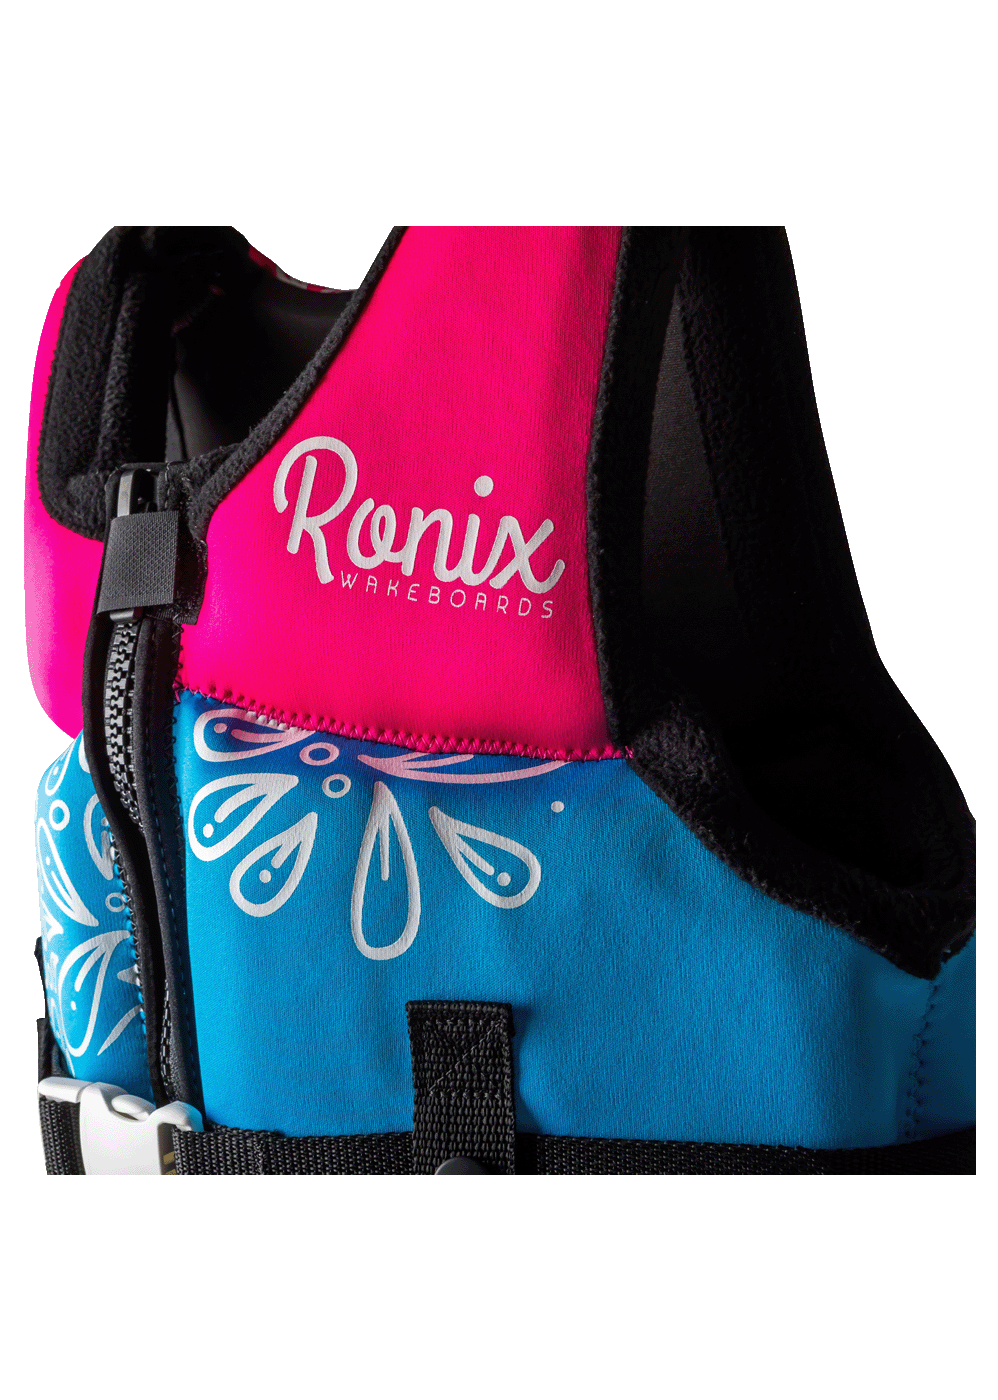 2022 Ronix Vests CGA August Youth Inset 5 copy